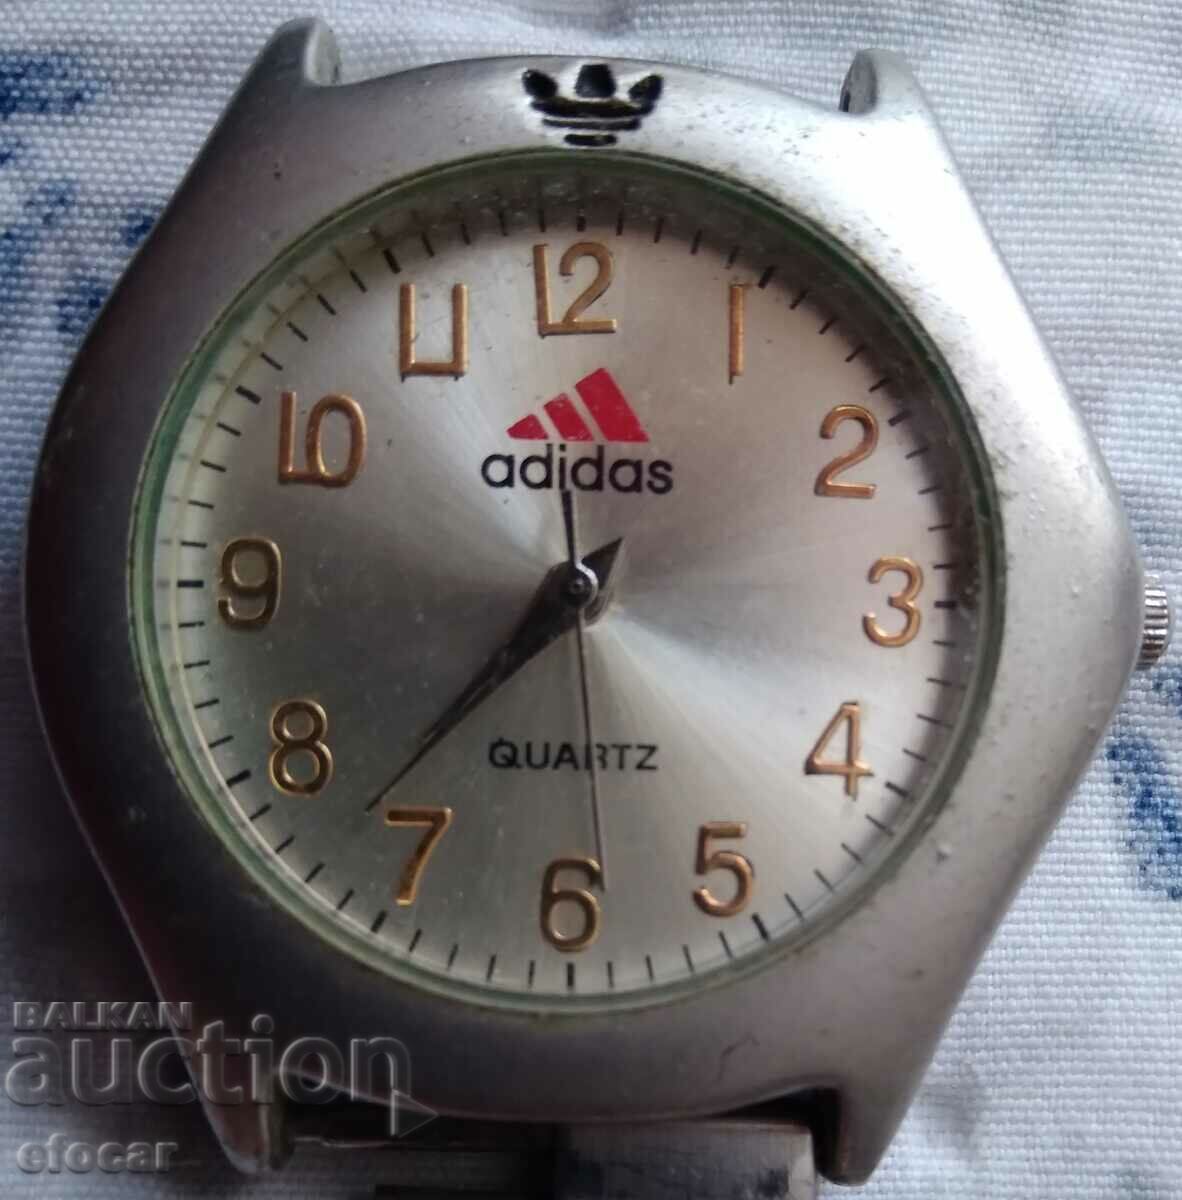 Adidas watch starting from 0.01st